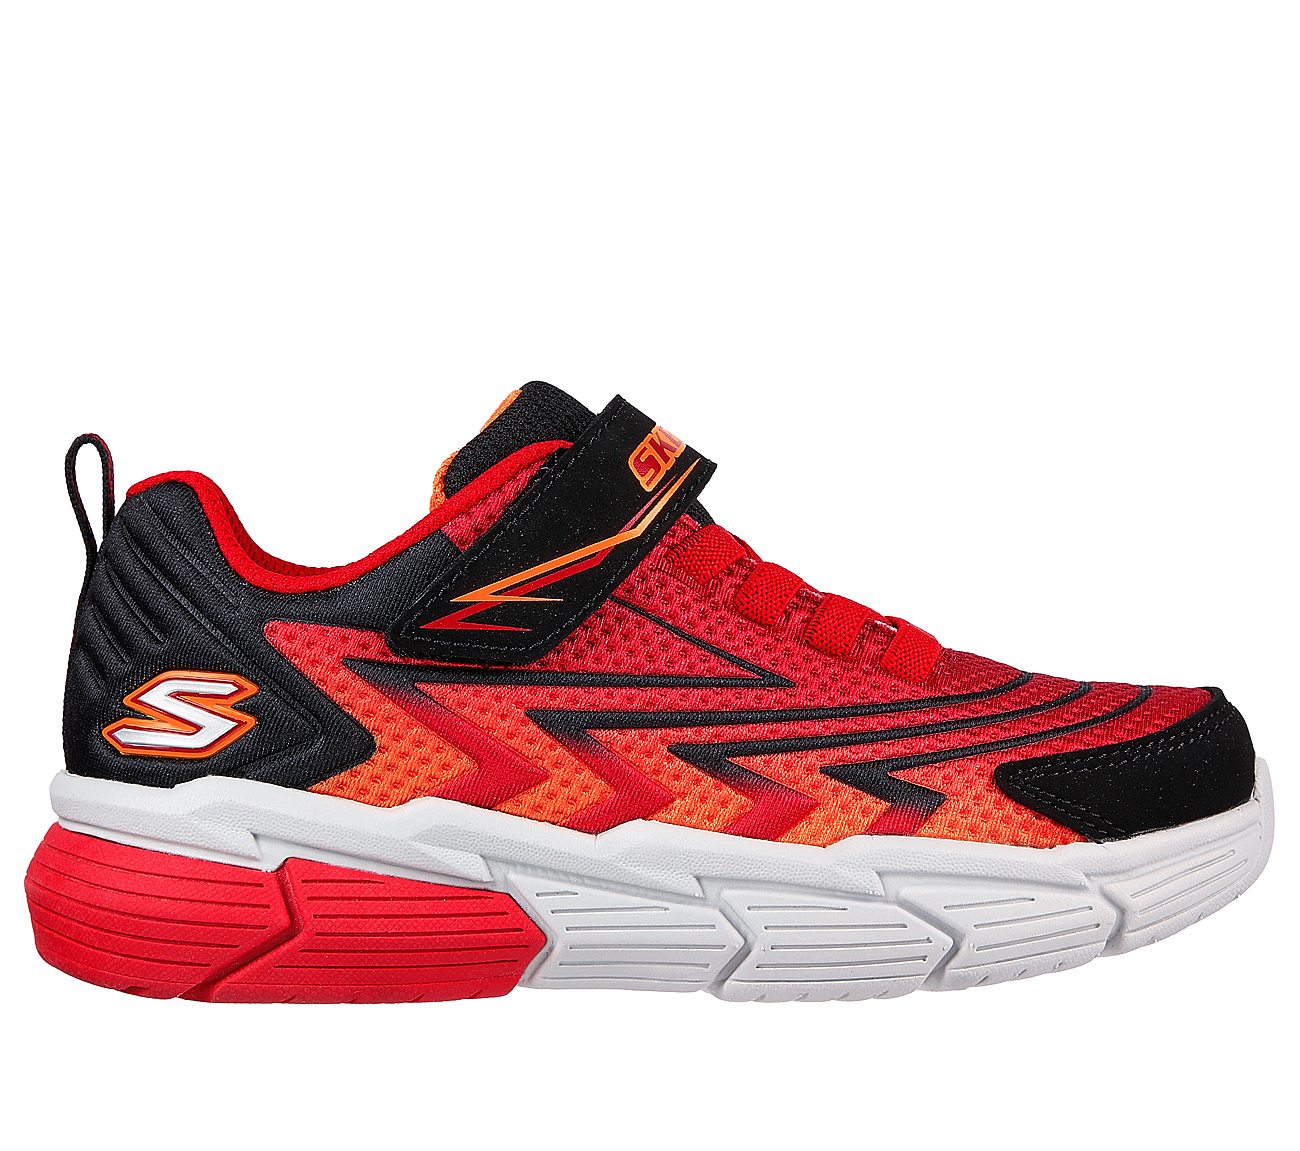 VECTOR-MATRIX - VOLTRONIK, RED Footwear Lateral View